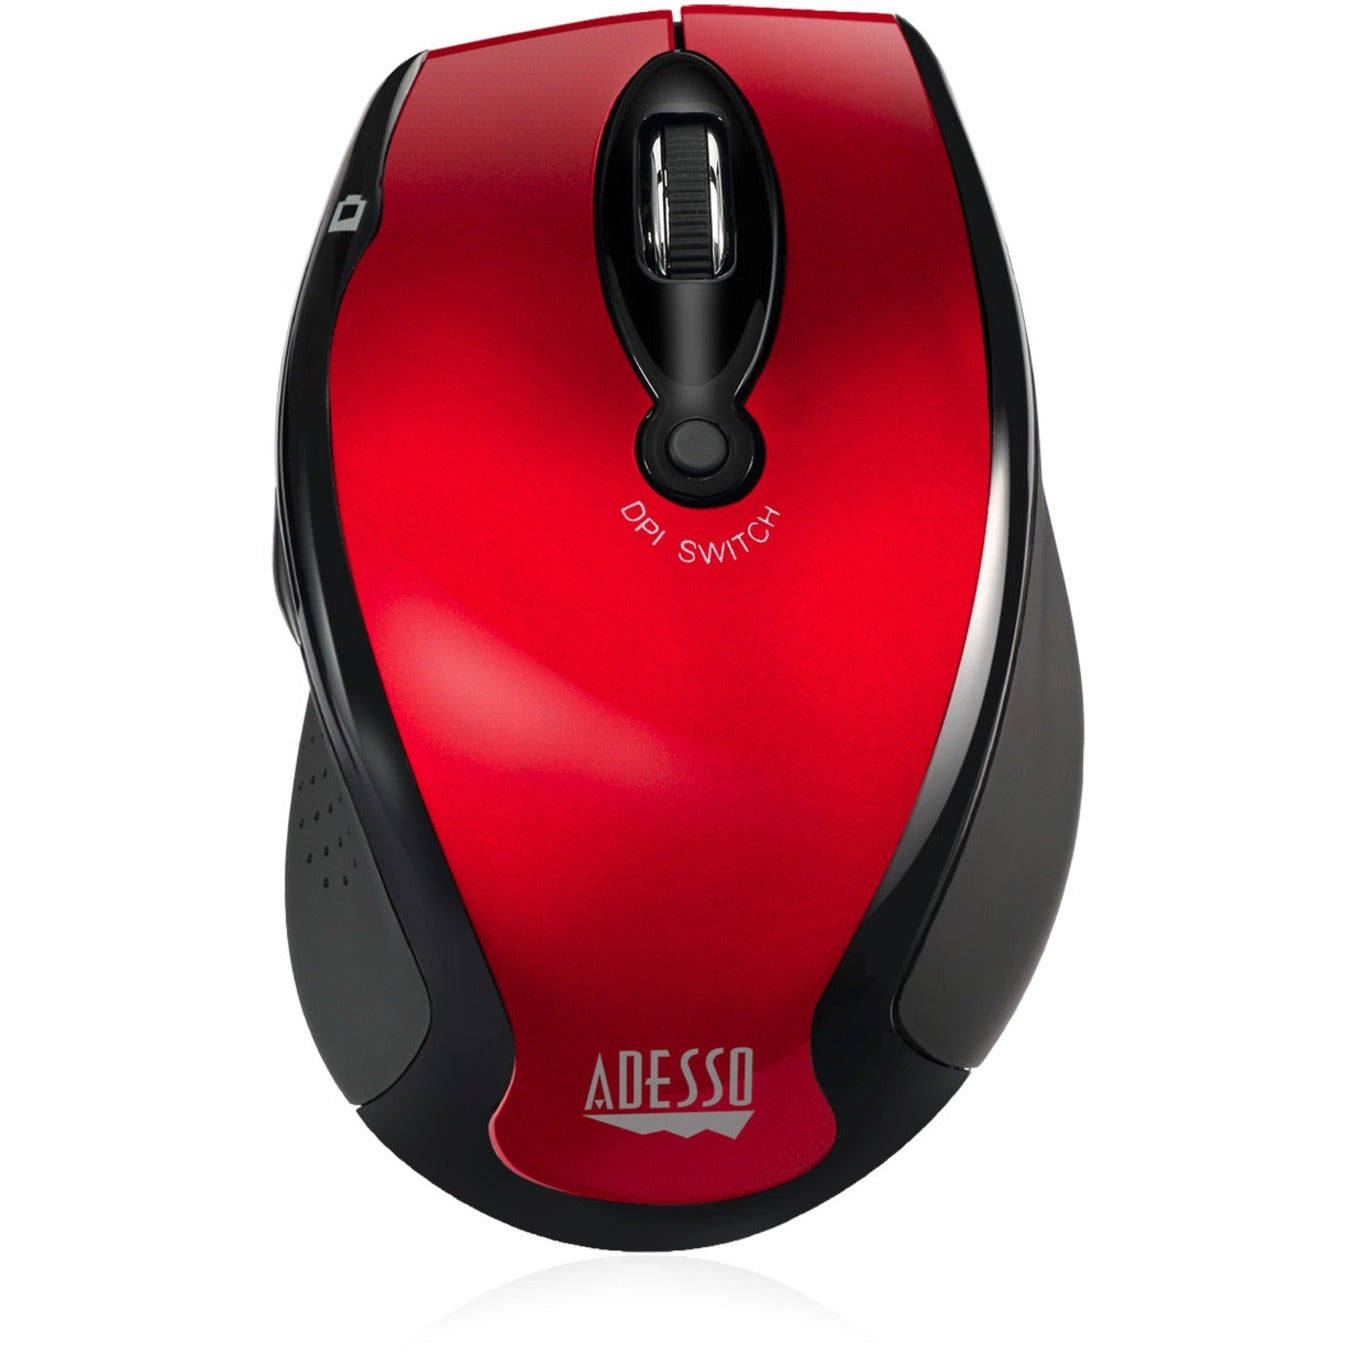 Adesso IMOUSE M20R Wireless Ergonomic Optical Mouse, Red, 2.4 GHz Radio Frequency, 1500 dpi Movement Resolution